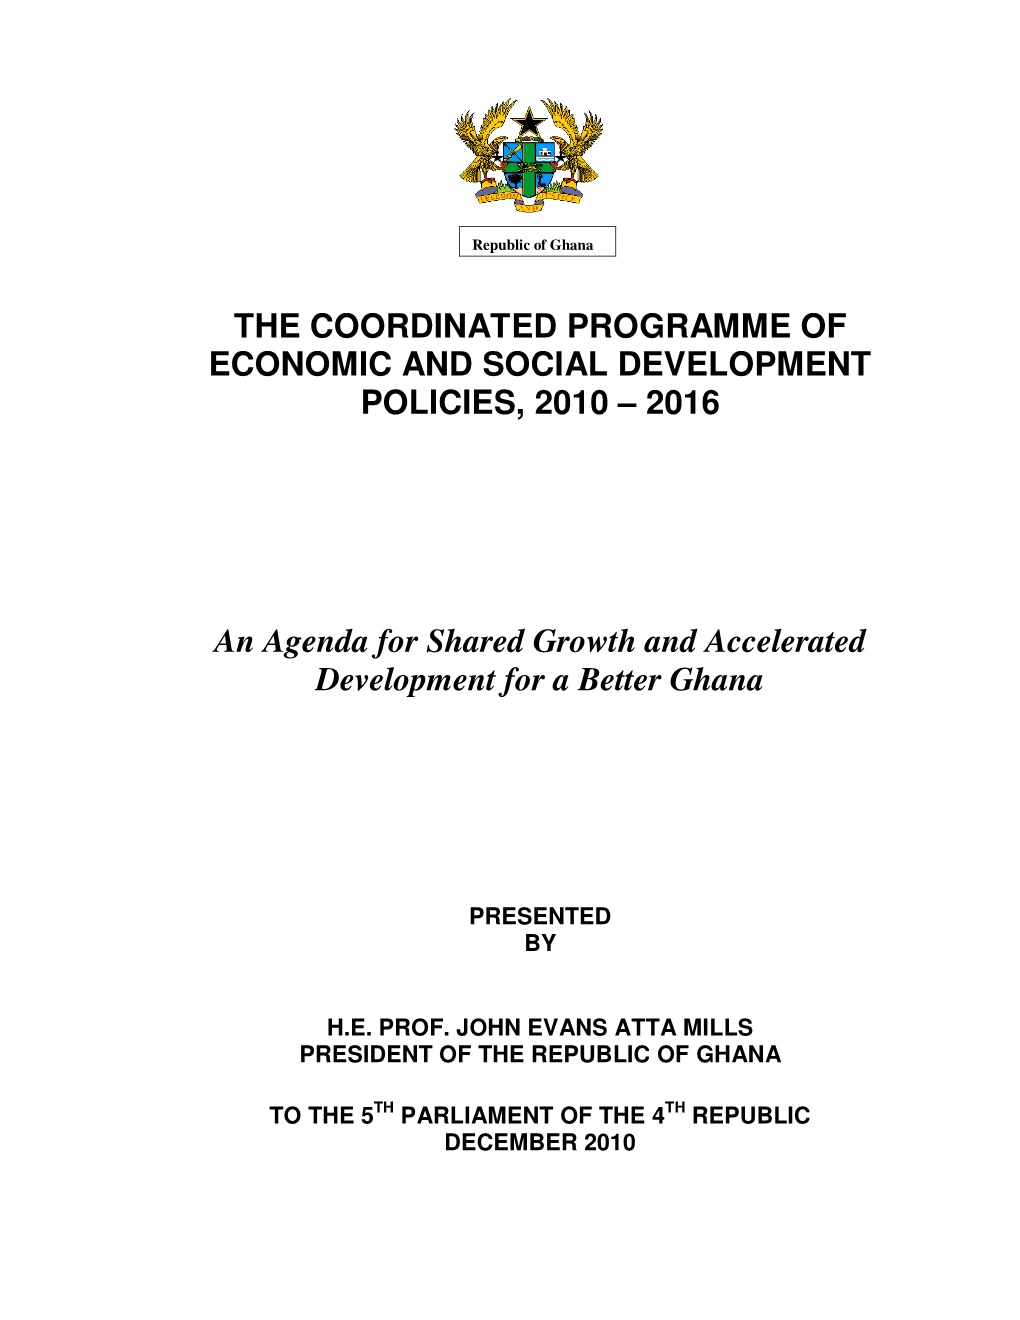 The Coordinated Programme of Economic and Social Development Policies, 2010 – 2016